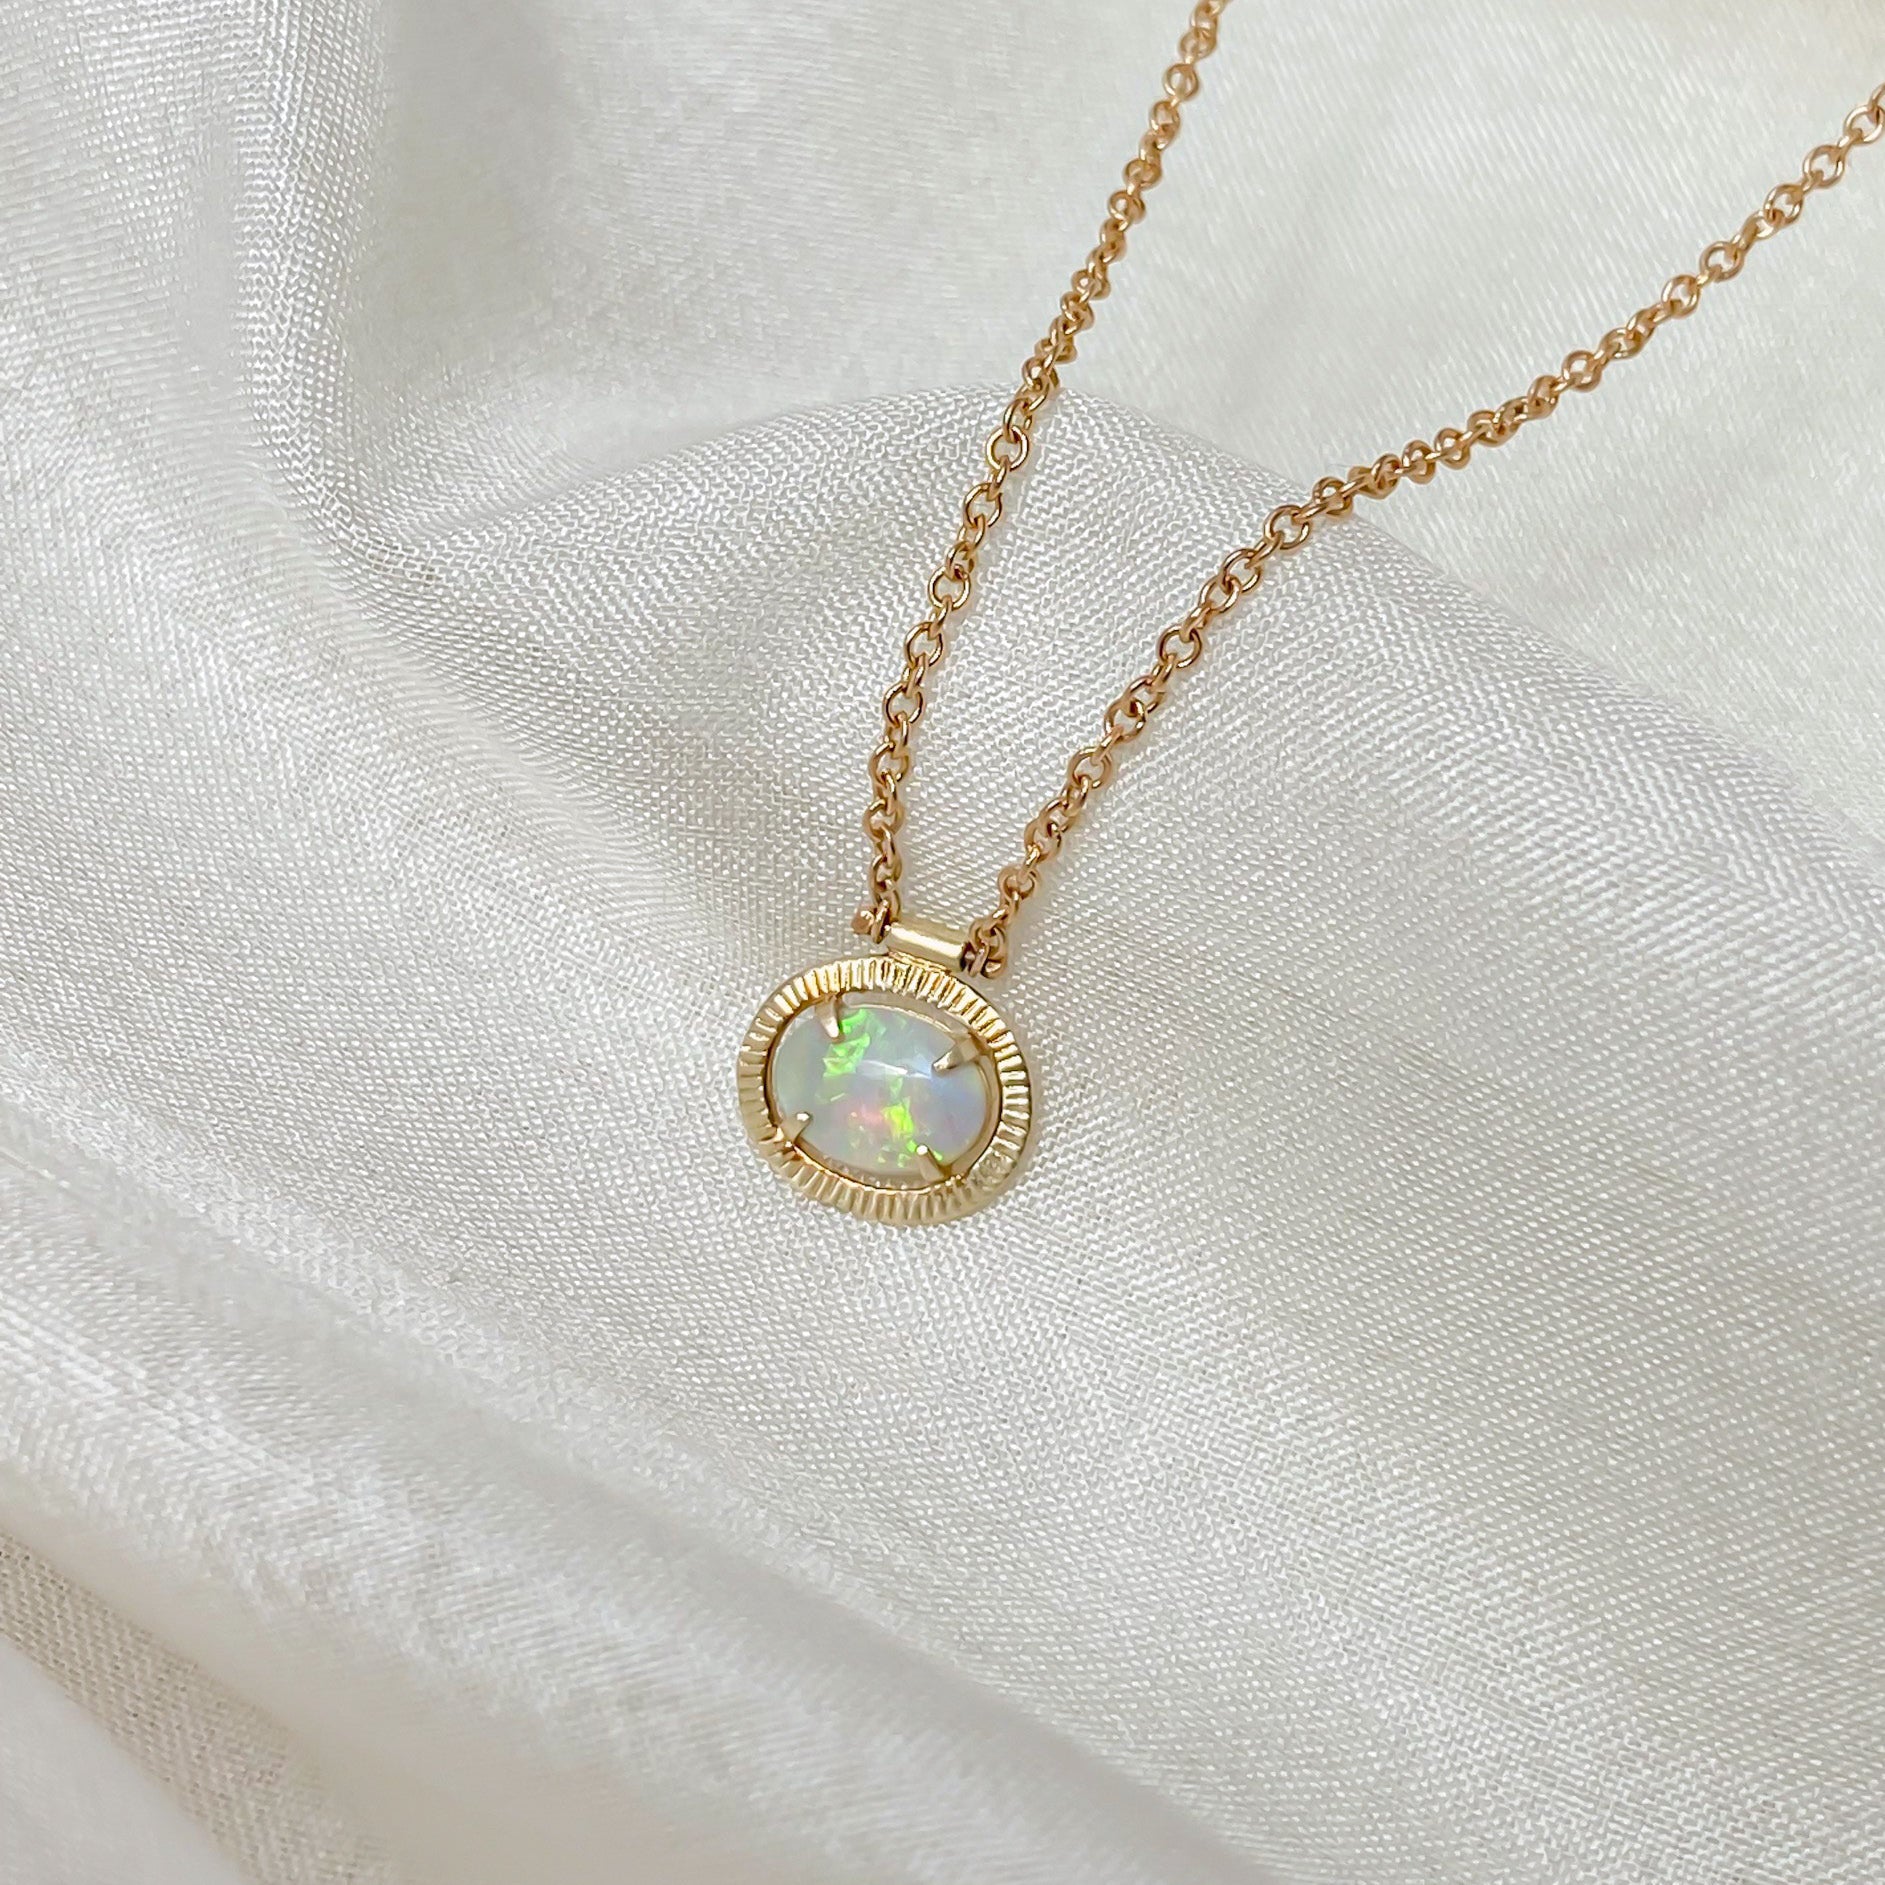 8ct Natural Opal Necklace Antique Victorian 15k Yellow Gold 16